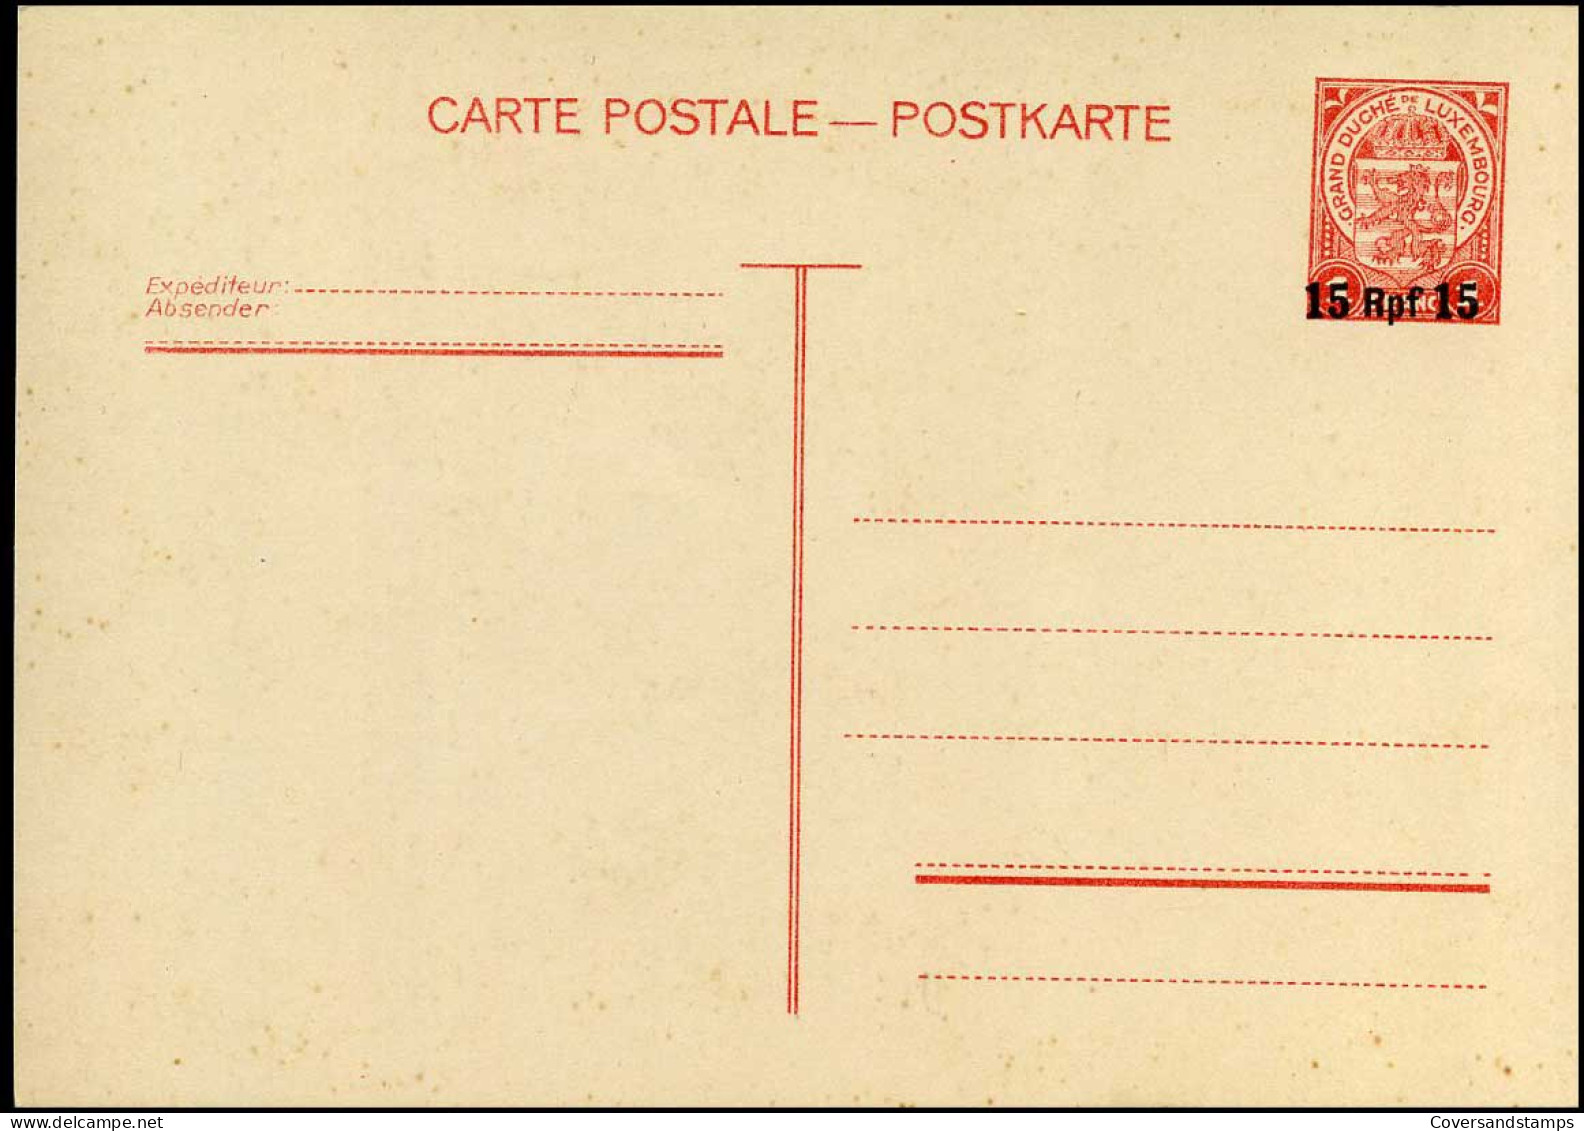 Luxembourg - Post Card - 15 Rpf On 1 Franc - Stamped Stationery